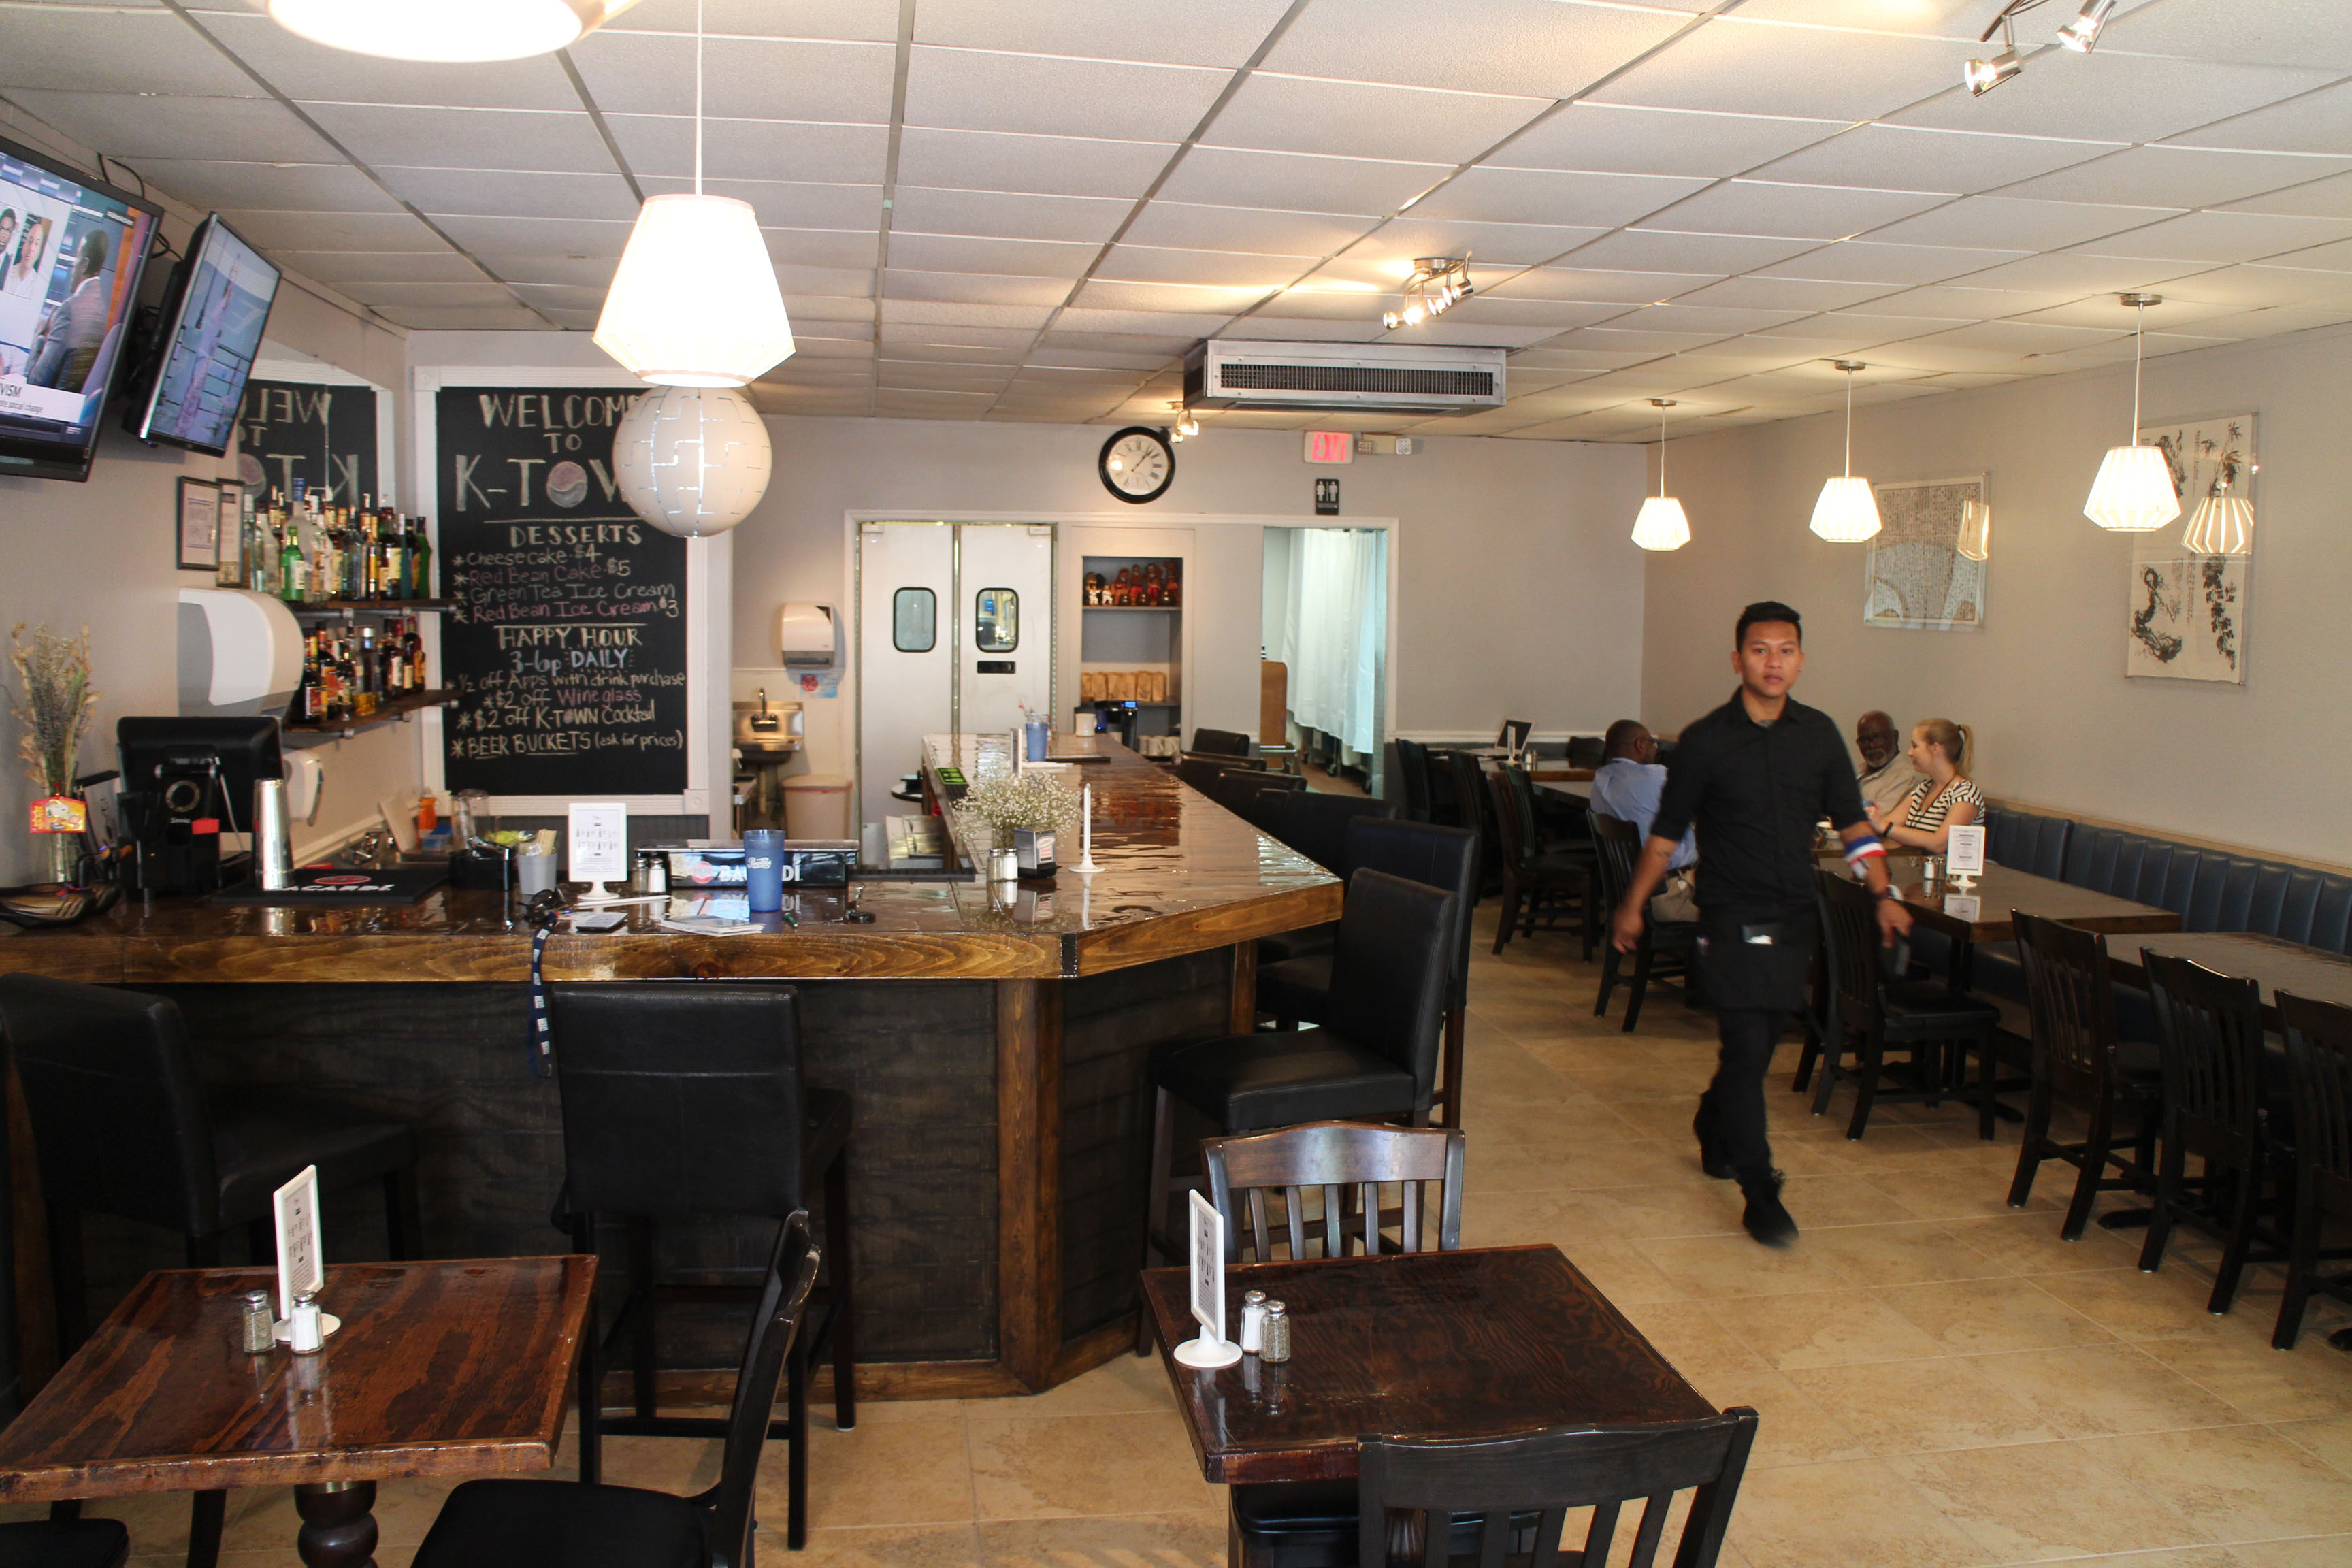 Mama J makes more room for foodie family - Richmond BizSense